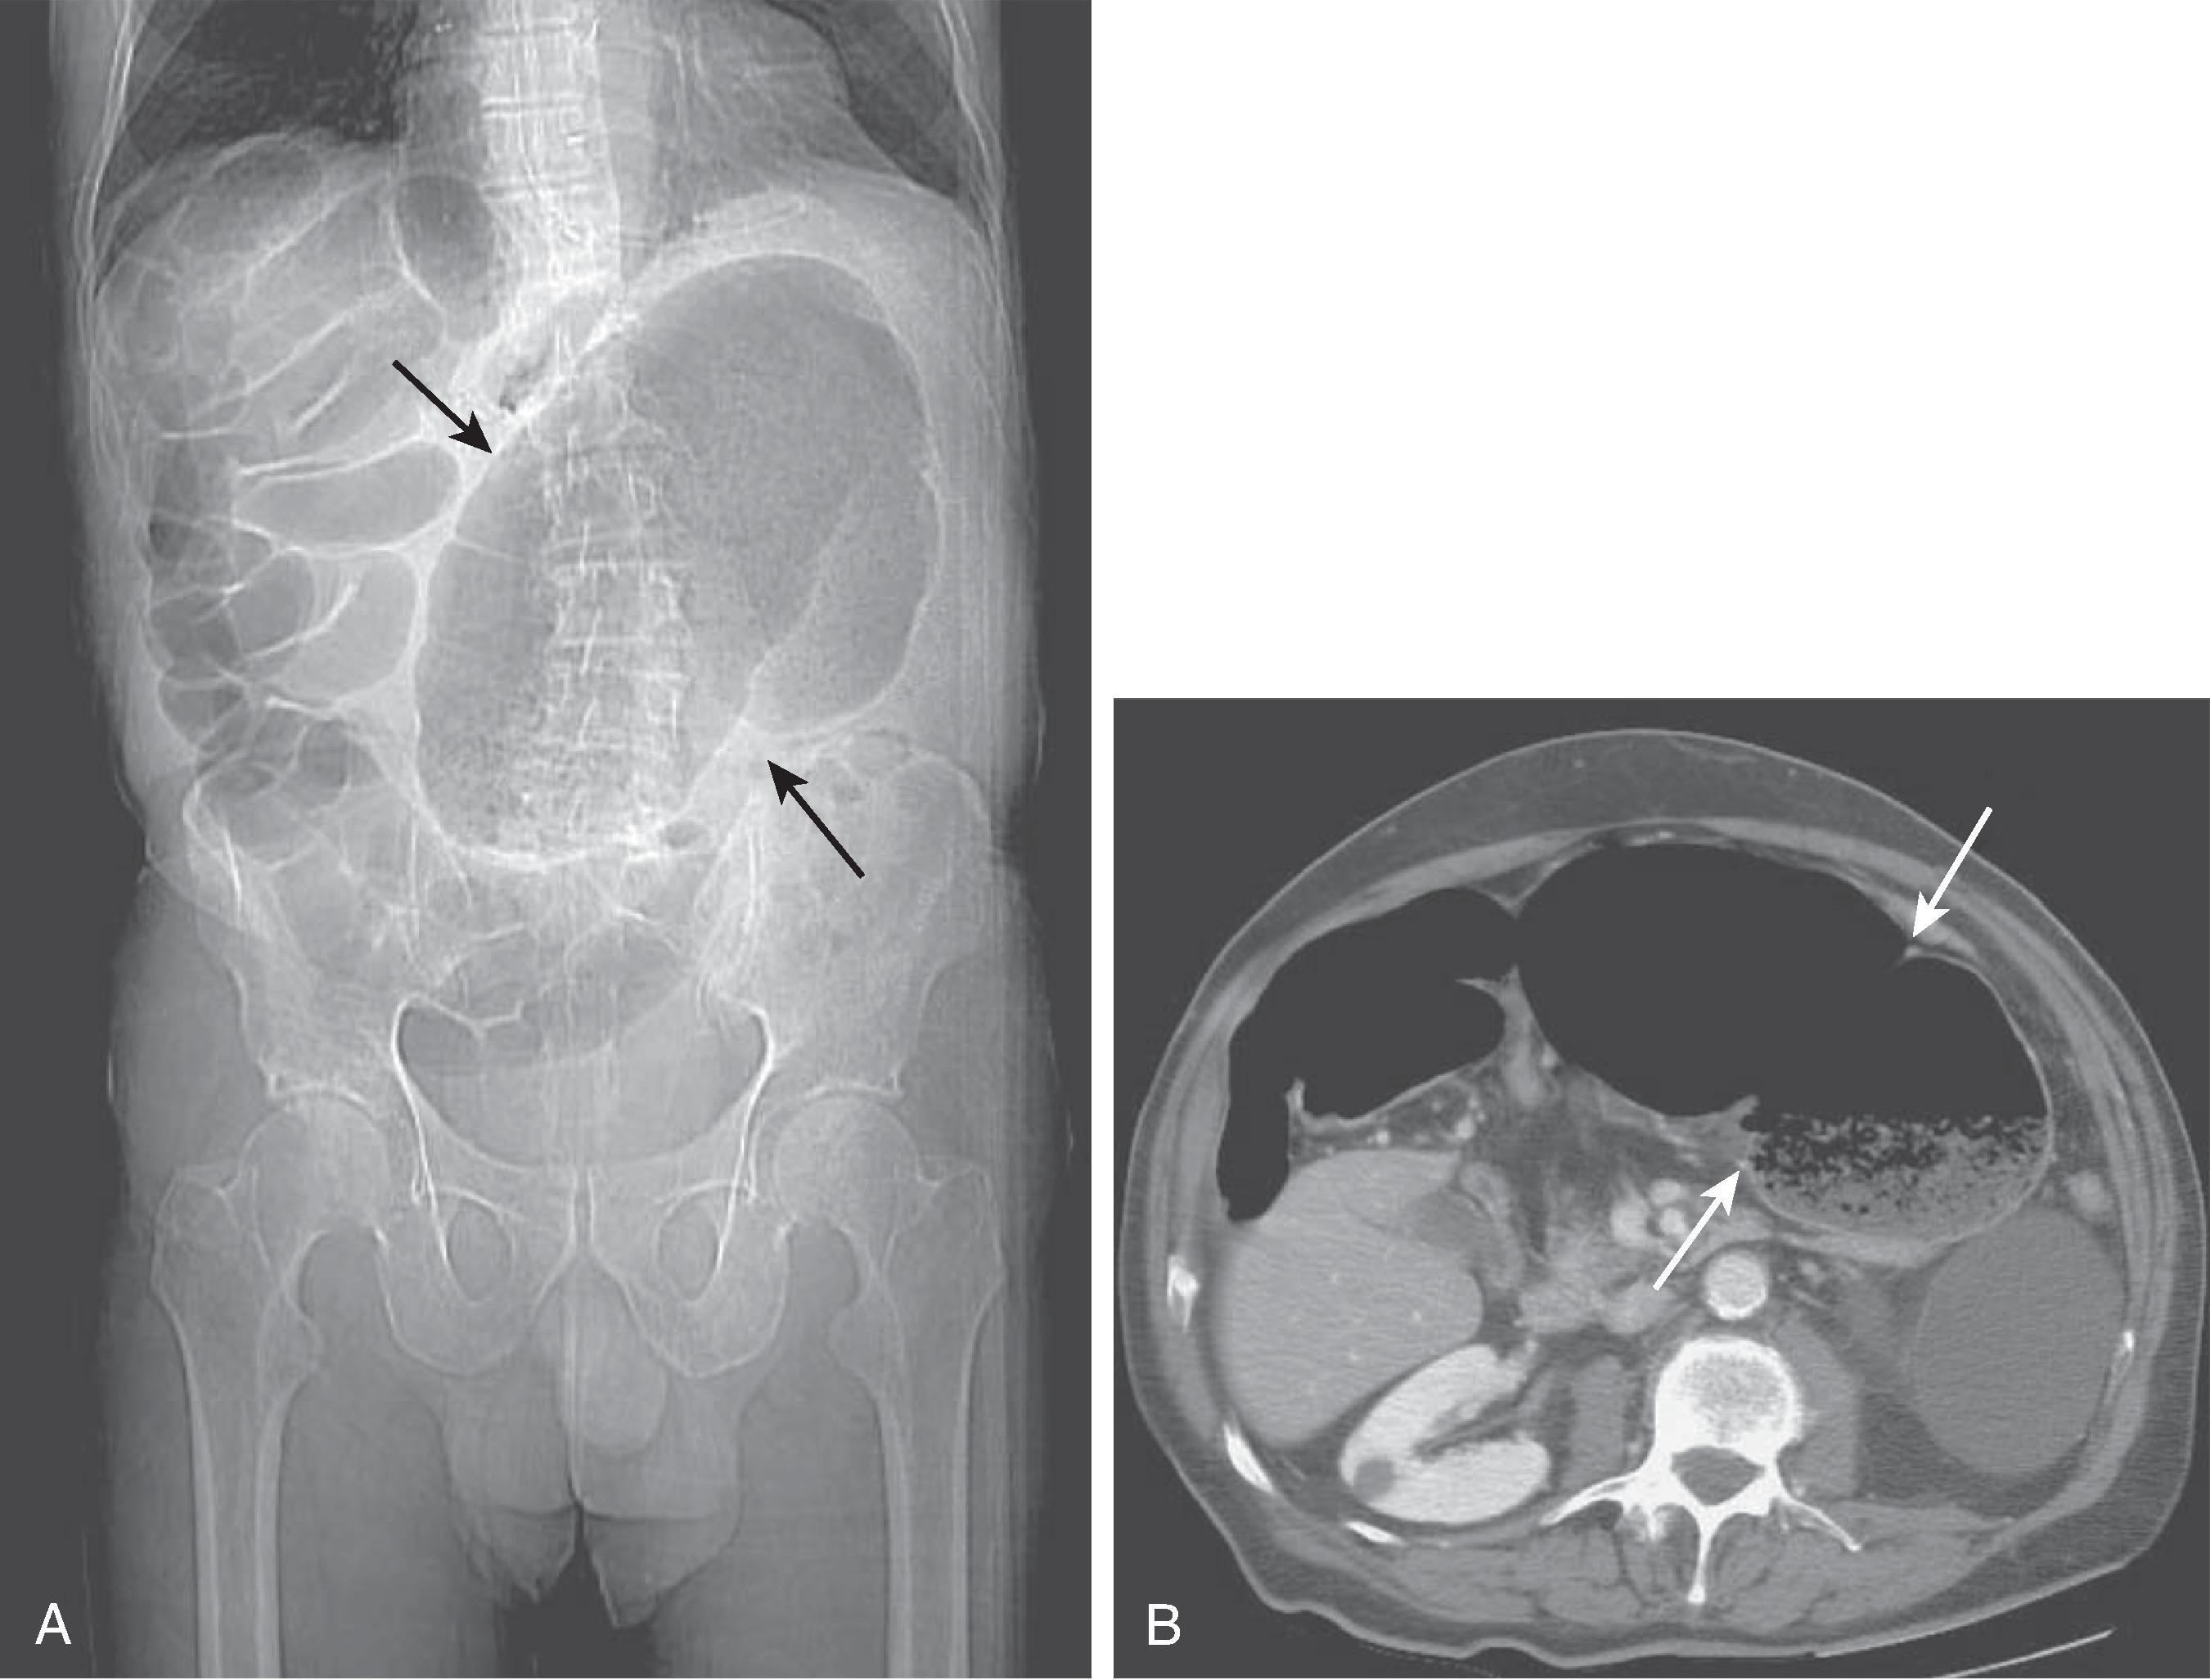 Fig. 46.6, Cecal volvulus: computed tomography (CT) features. (A) Scout image shows that a distended cecum (arrows) is present in the left upper quadrant, with multiple dilated small bowel loops in the right upper quadrant. (B) CT scan demonstrates the malpositioned cecum (arrows) and swirling of the mesentery.